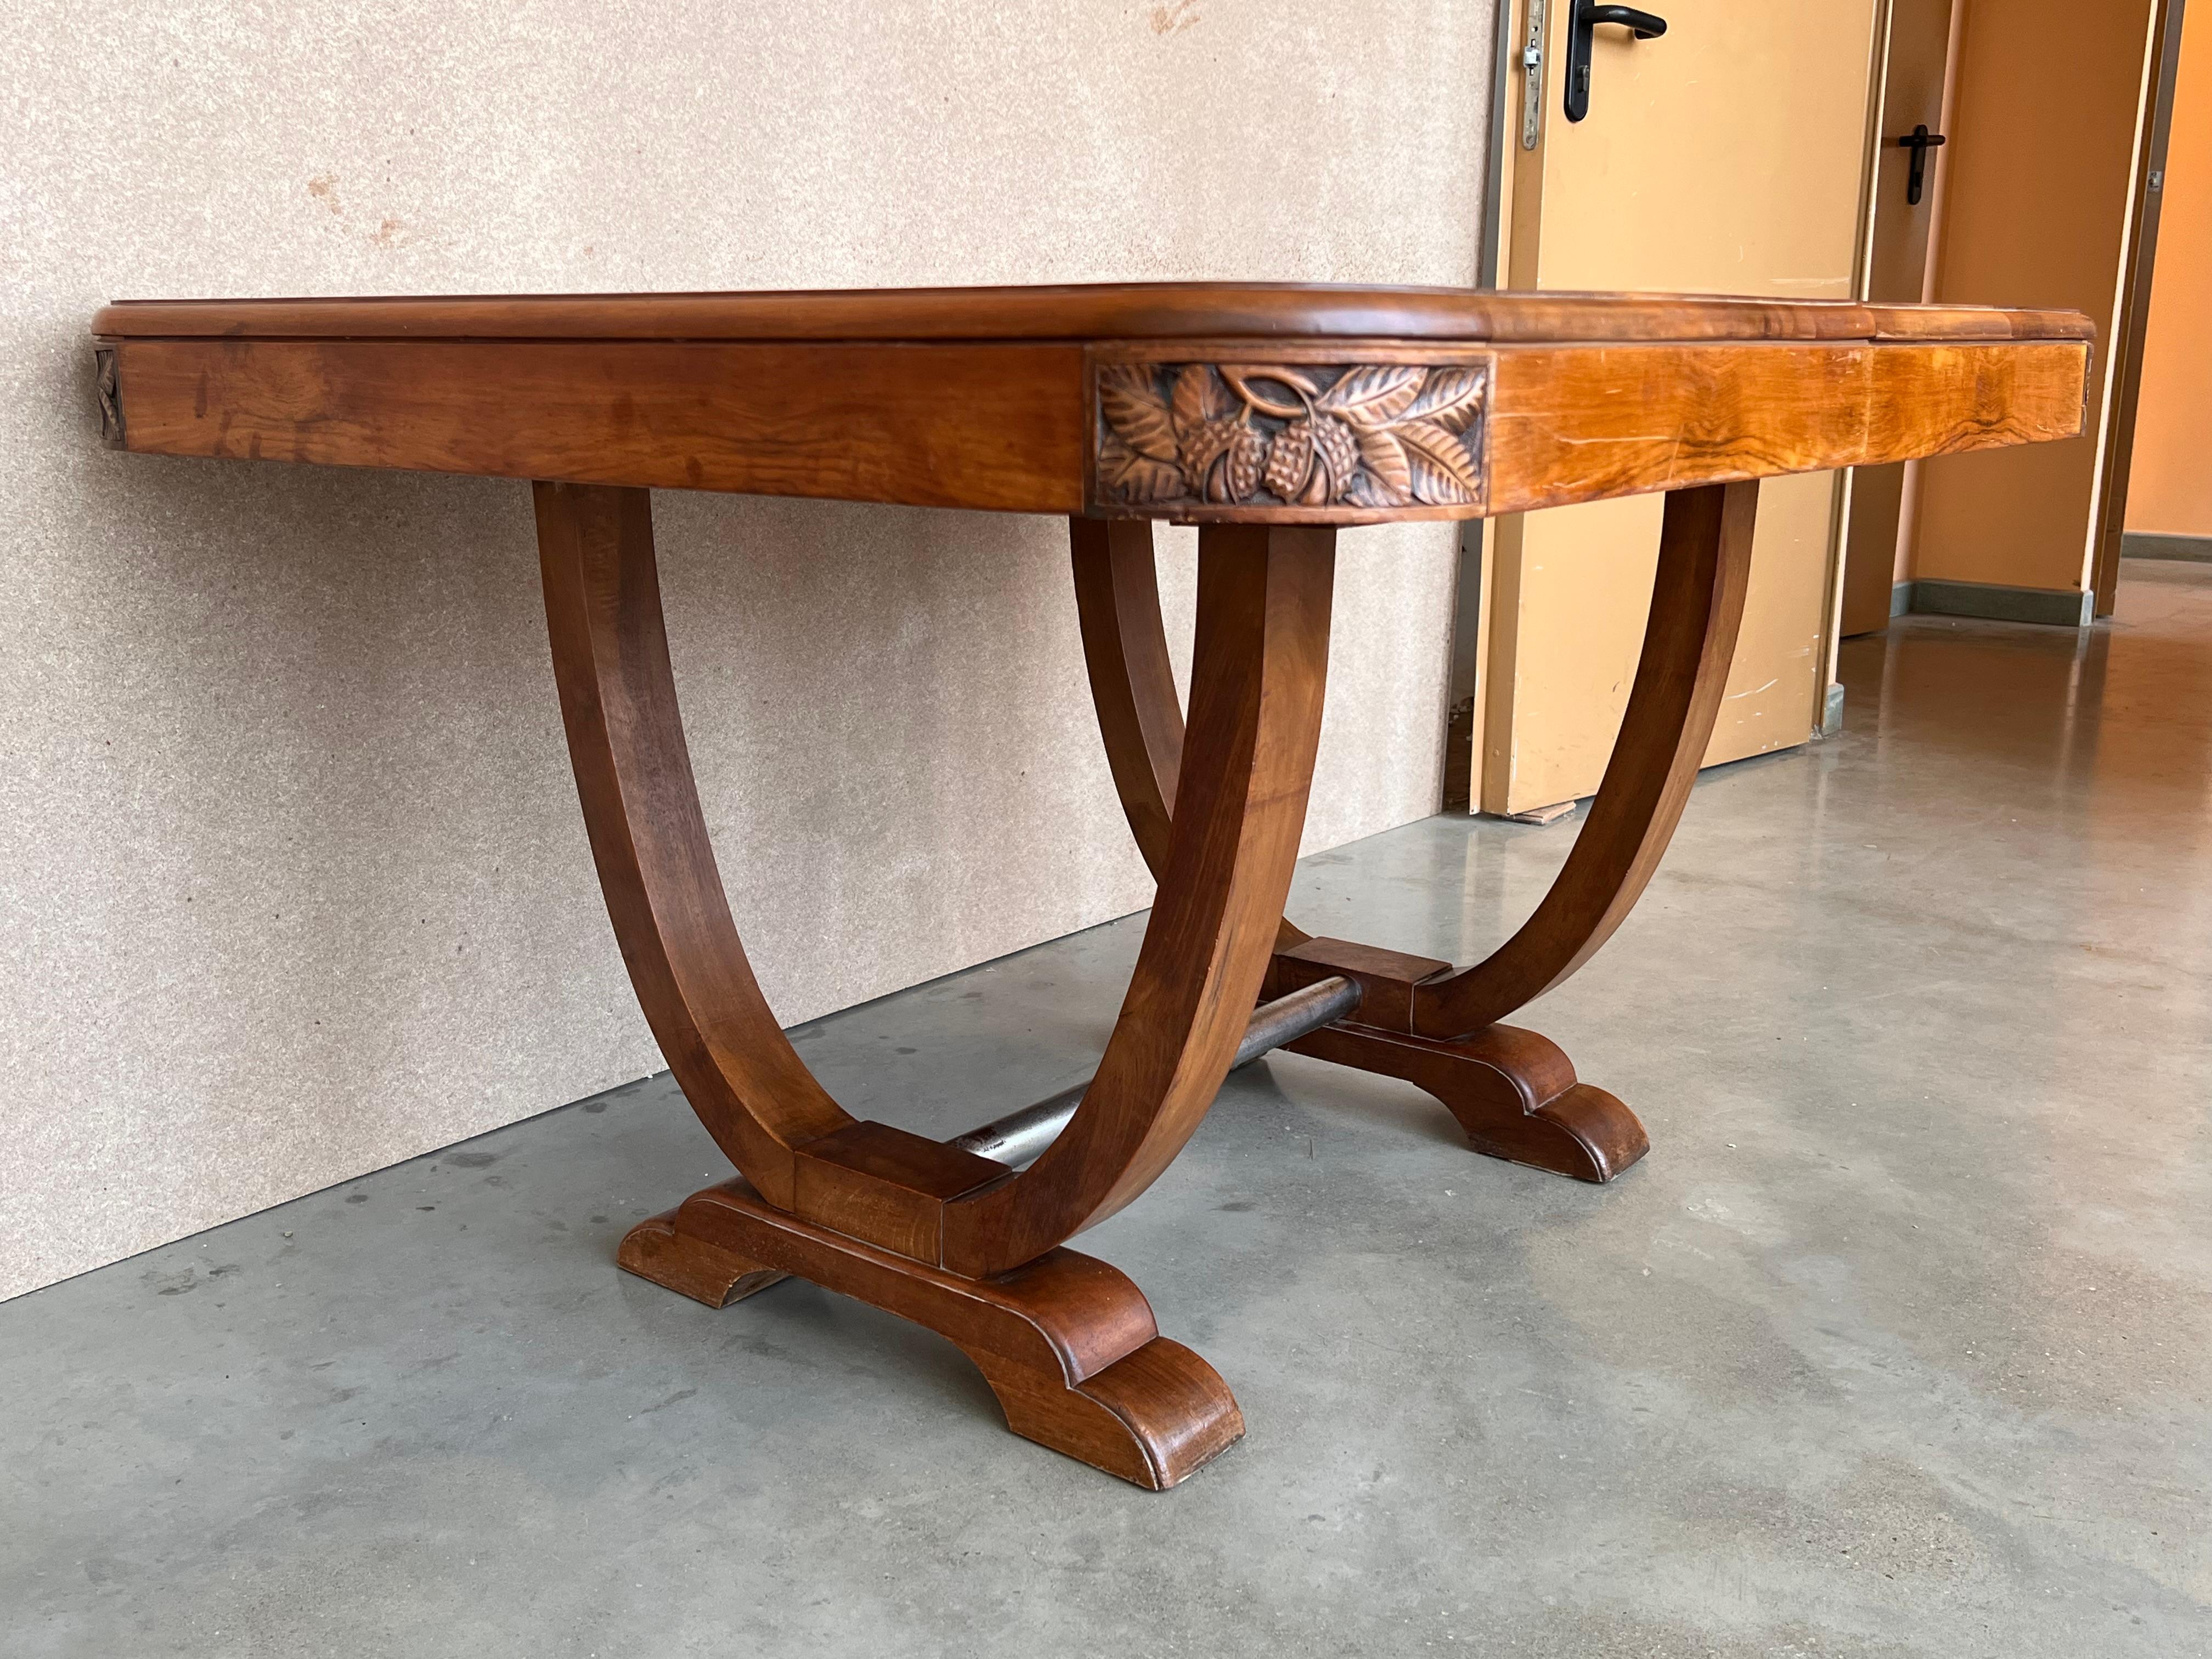 20th Century Art Deco Mid-Century Walnut Dining Table with Extensions and Carved Edges